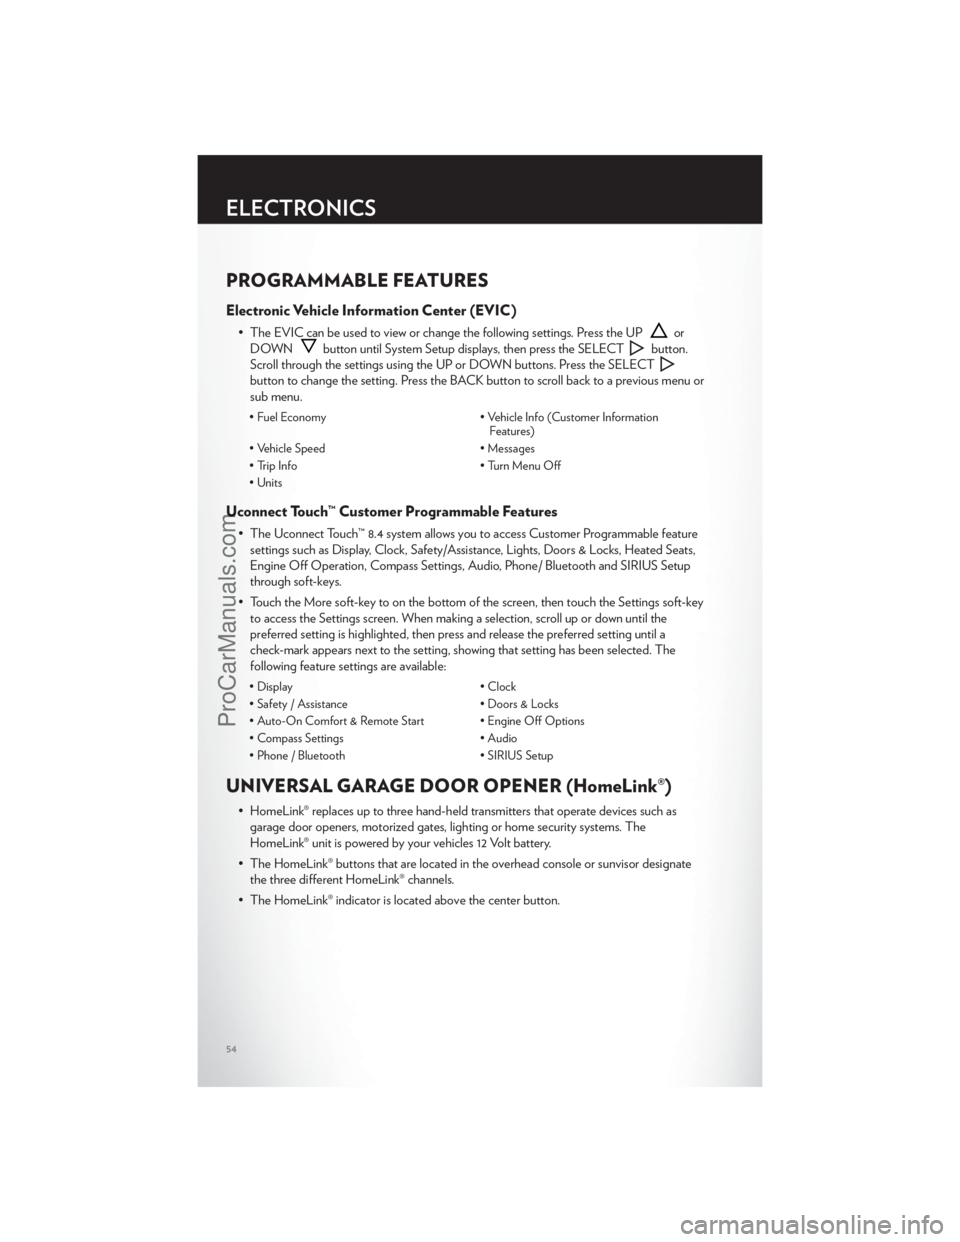 CHRYSLER 300 S 2012  Owners Manual PROGRAMMABLE FEATURES
Electronic Vehicle Information Center (EVIC)
• The EVIC can be used to view or change the following settings. Press the UPor
DOWN
button until System Setup displays, then press